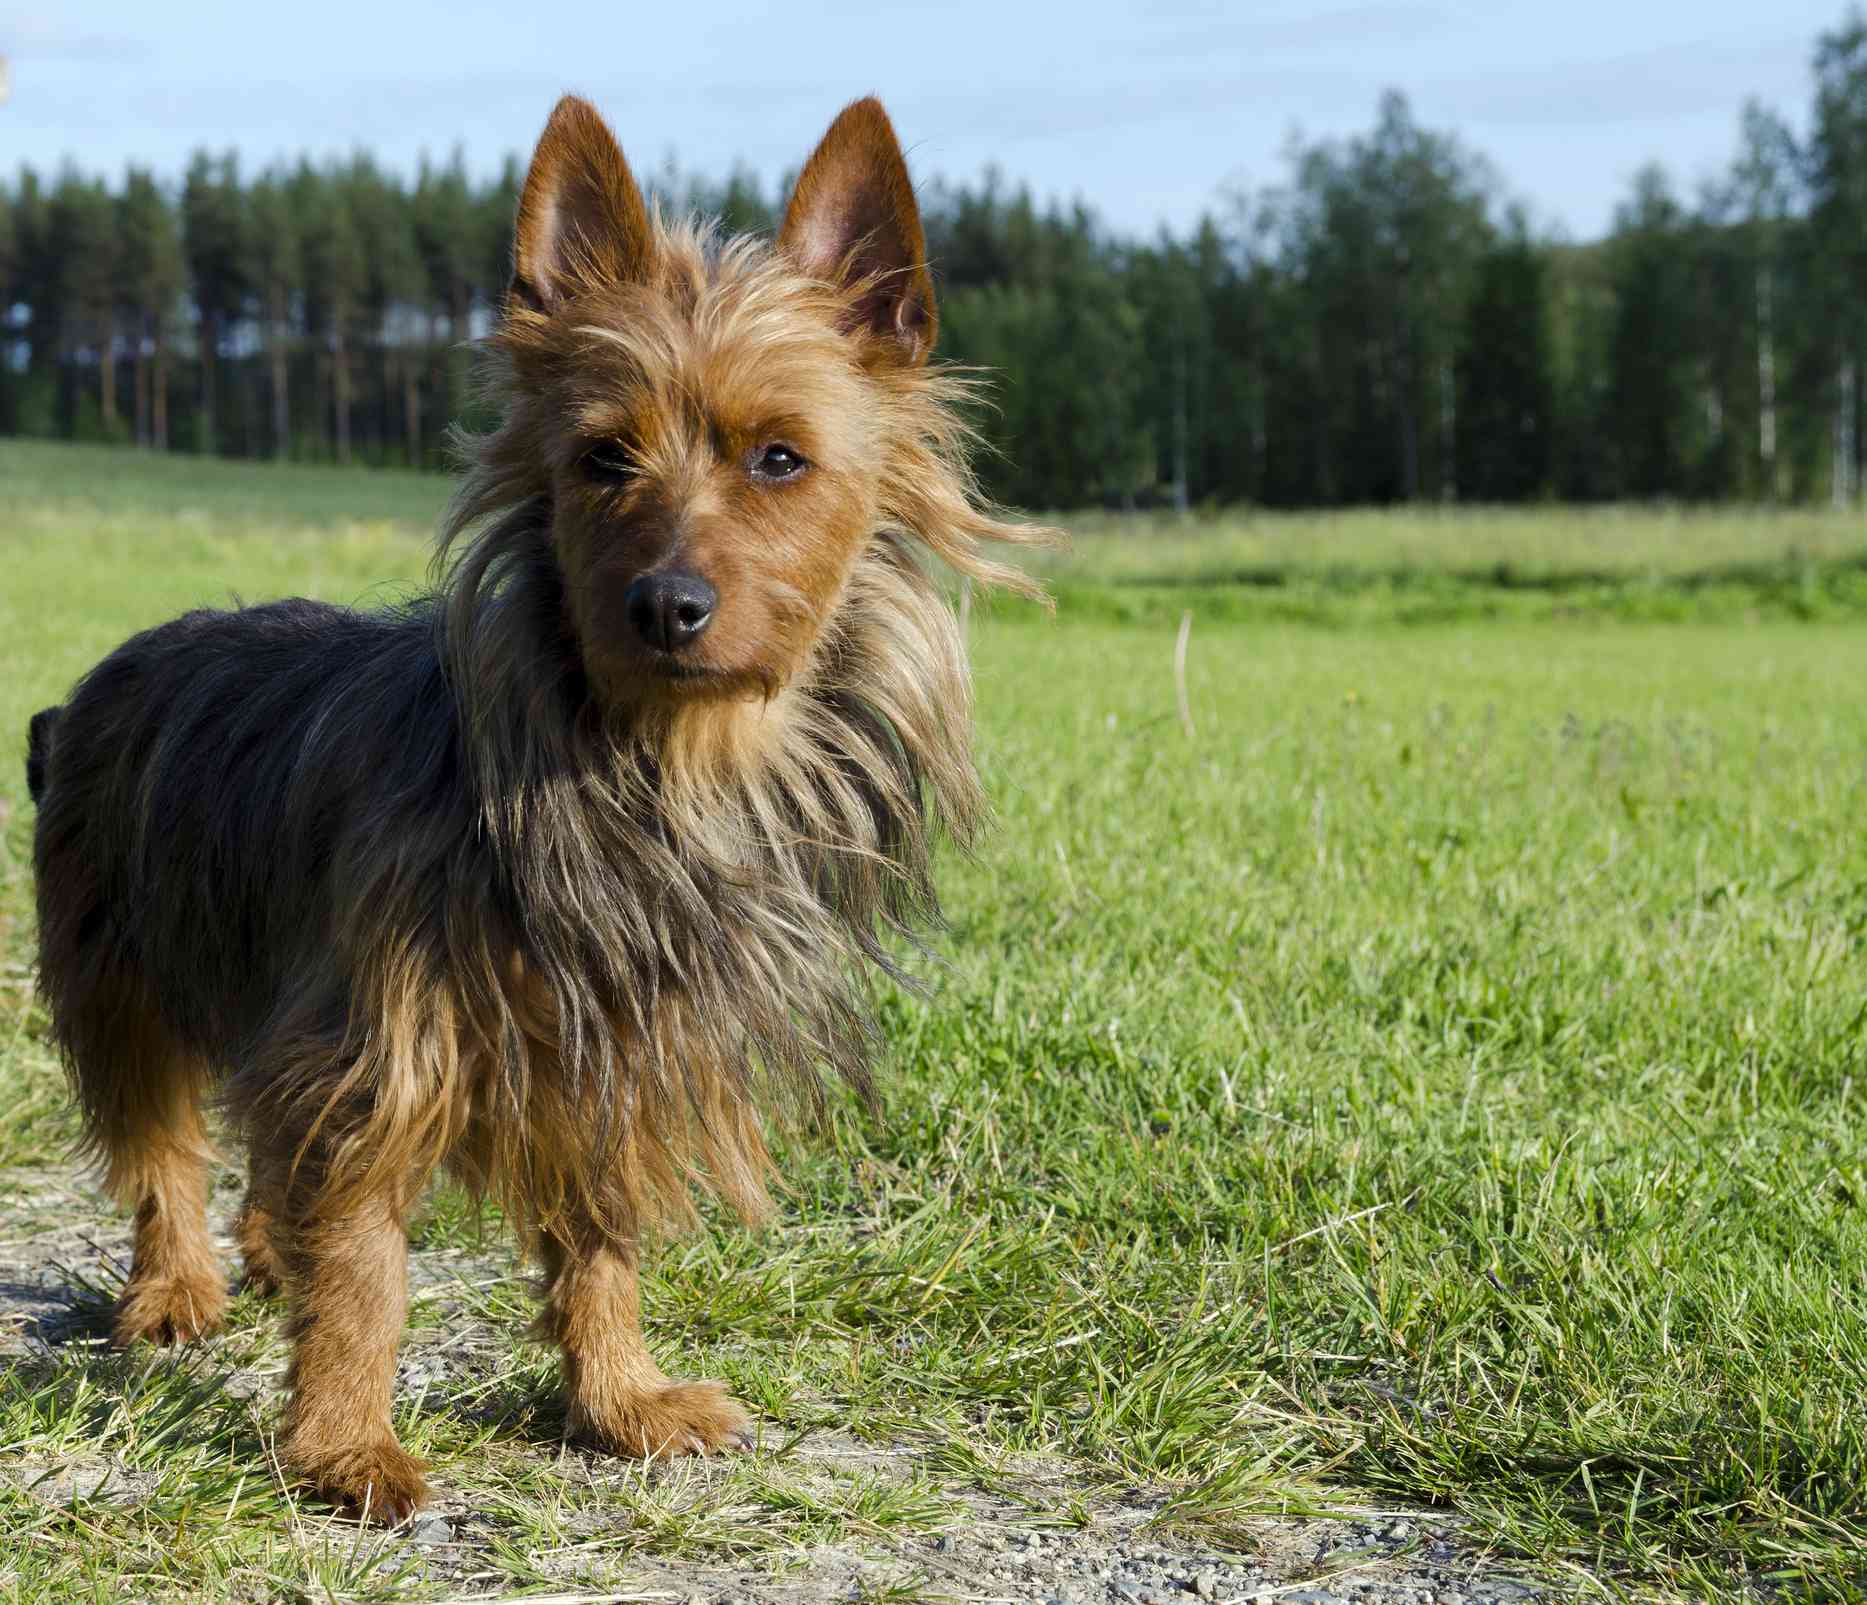 Australian Terrier standing on grass in front of a forest